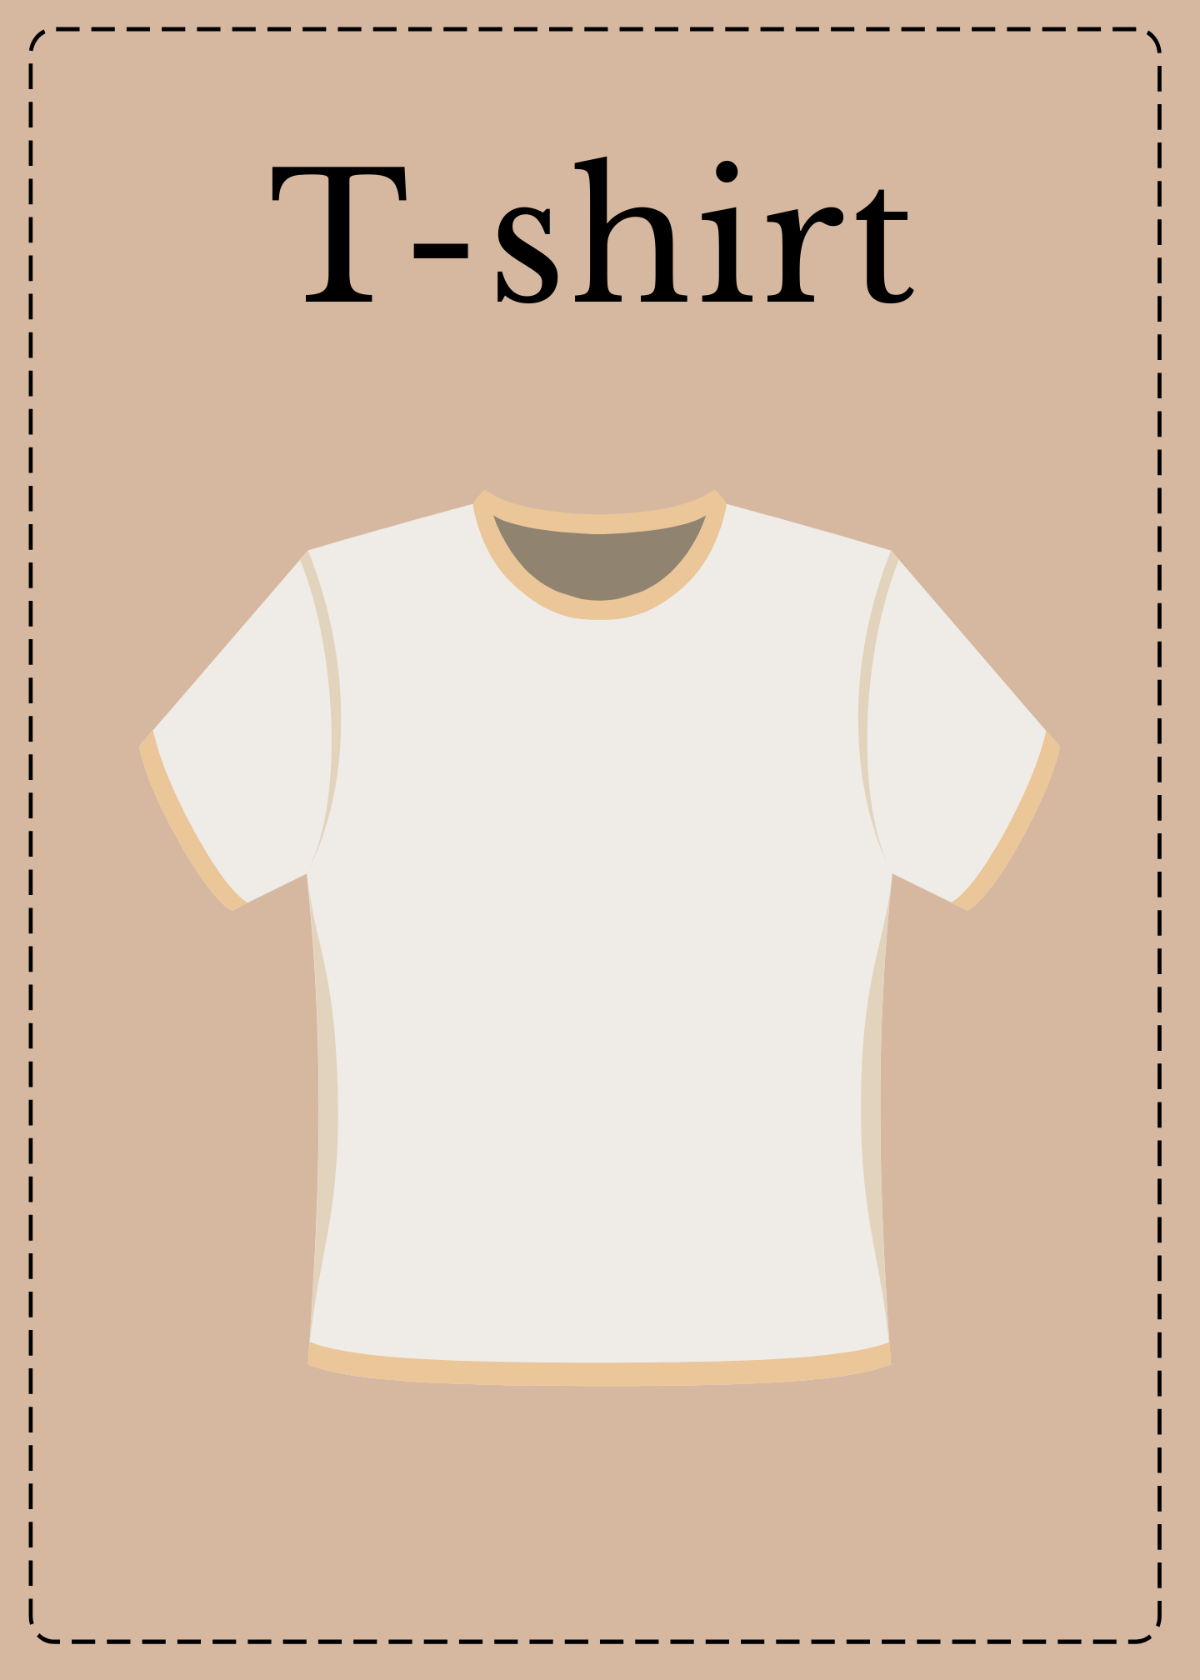 Clothing Flashcards Template